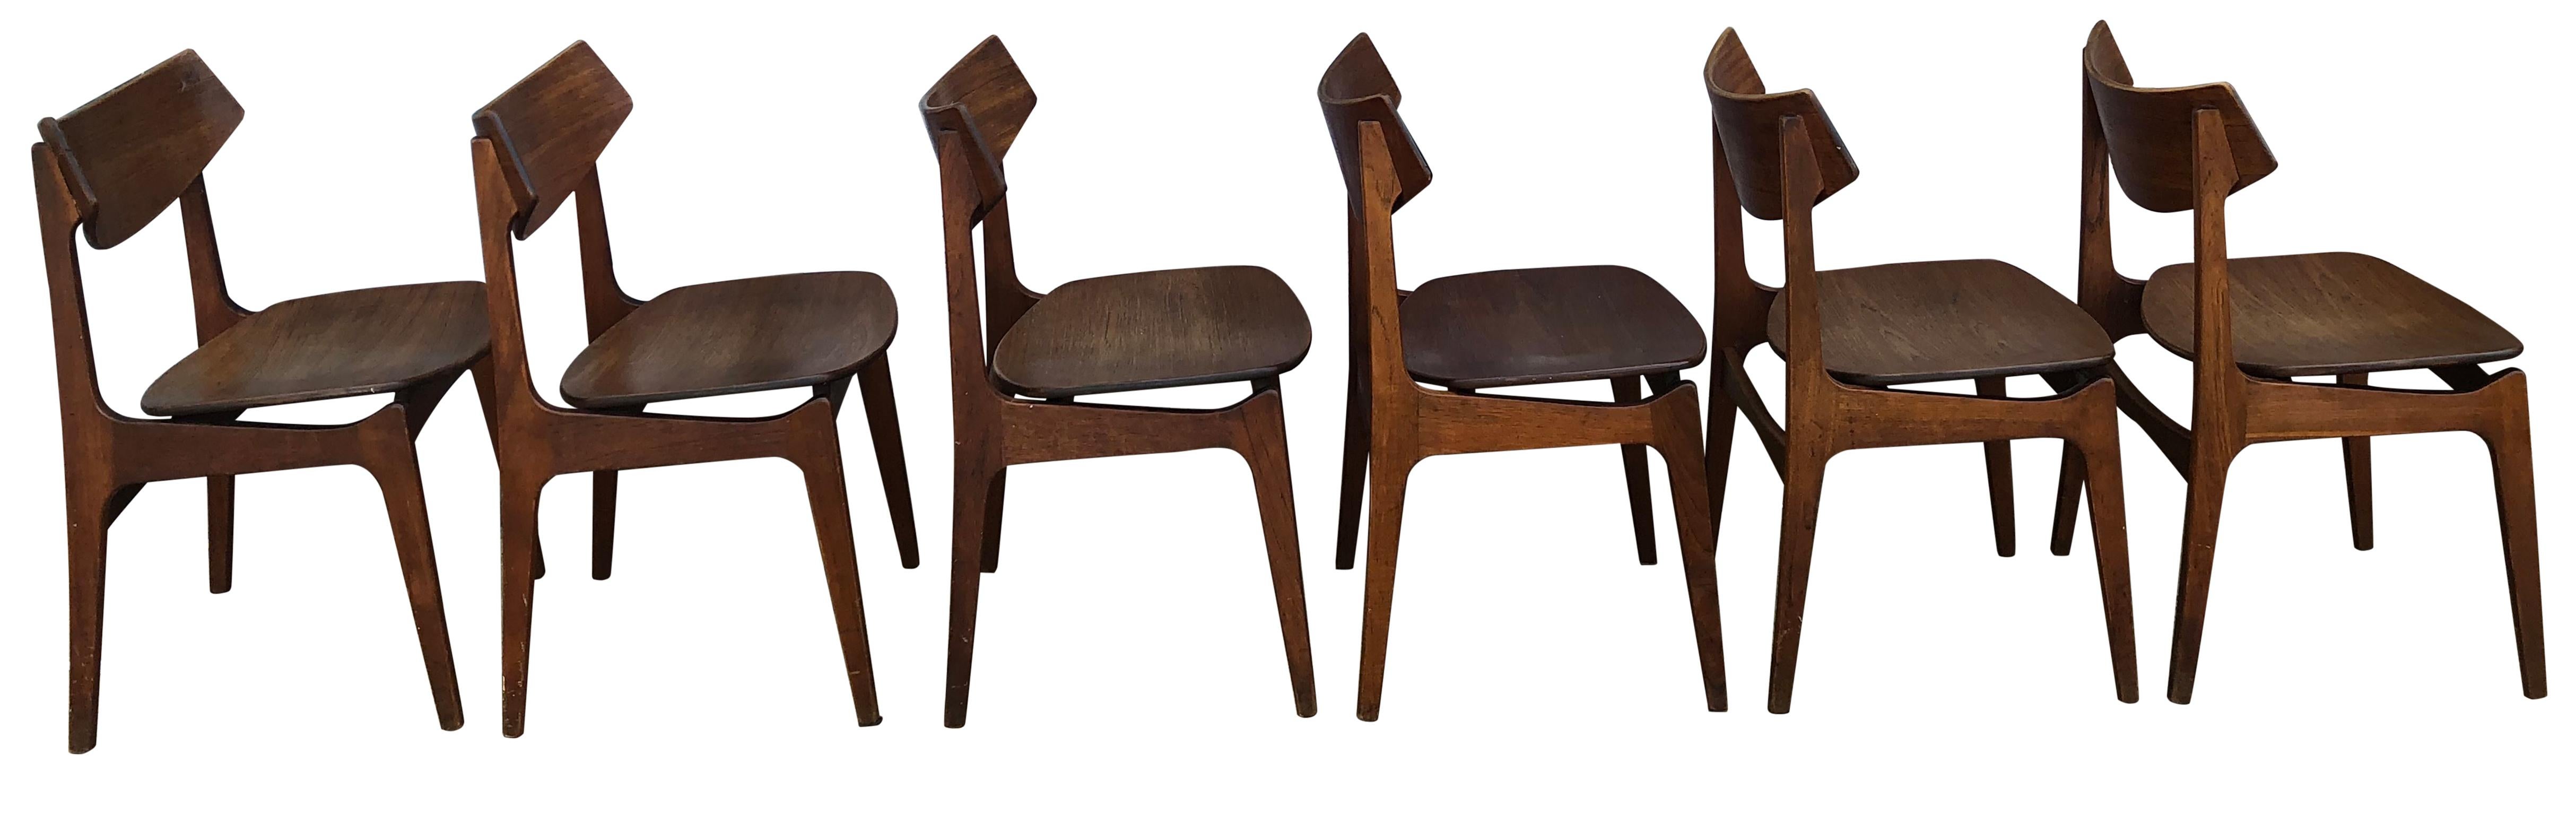 Beautiful teak wood dining chairs for Funder-Schmidt & Madsen designed by Erik Buch. This listing is for (6) chairs (1) set. Great Danish design. (1) chair has a repair to the back rest. All chairs are in original vintage condition. These chairs are